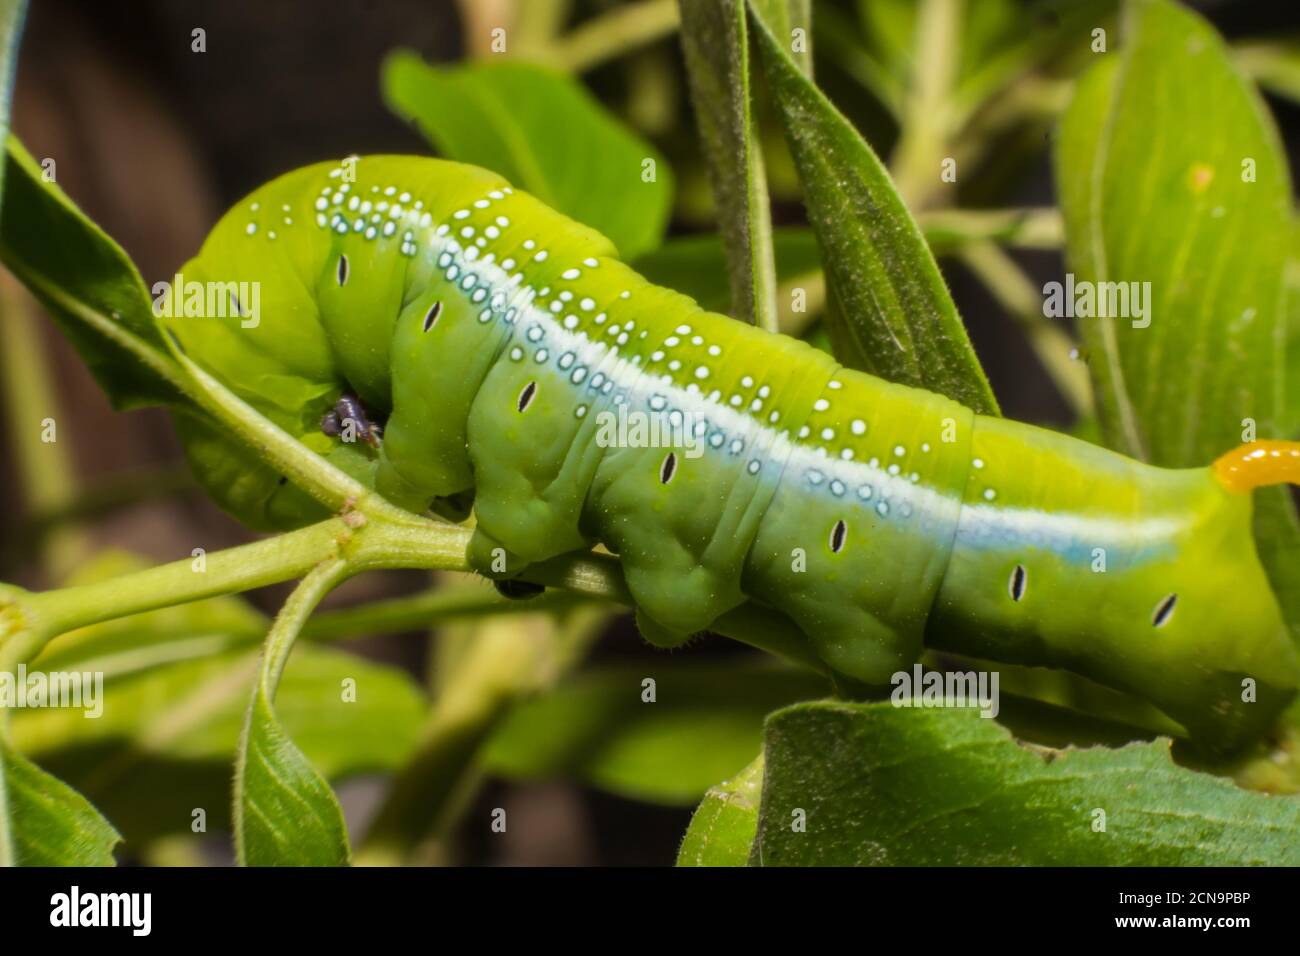 Green butterfly worm (Leaf eating caterpillar) on leaf.Macro view Stock Photo